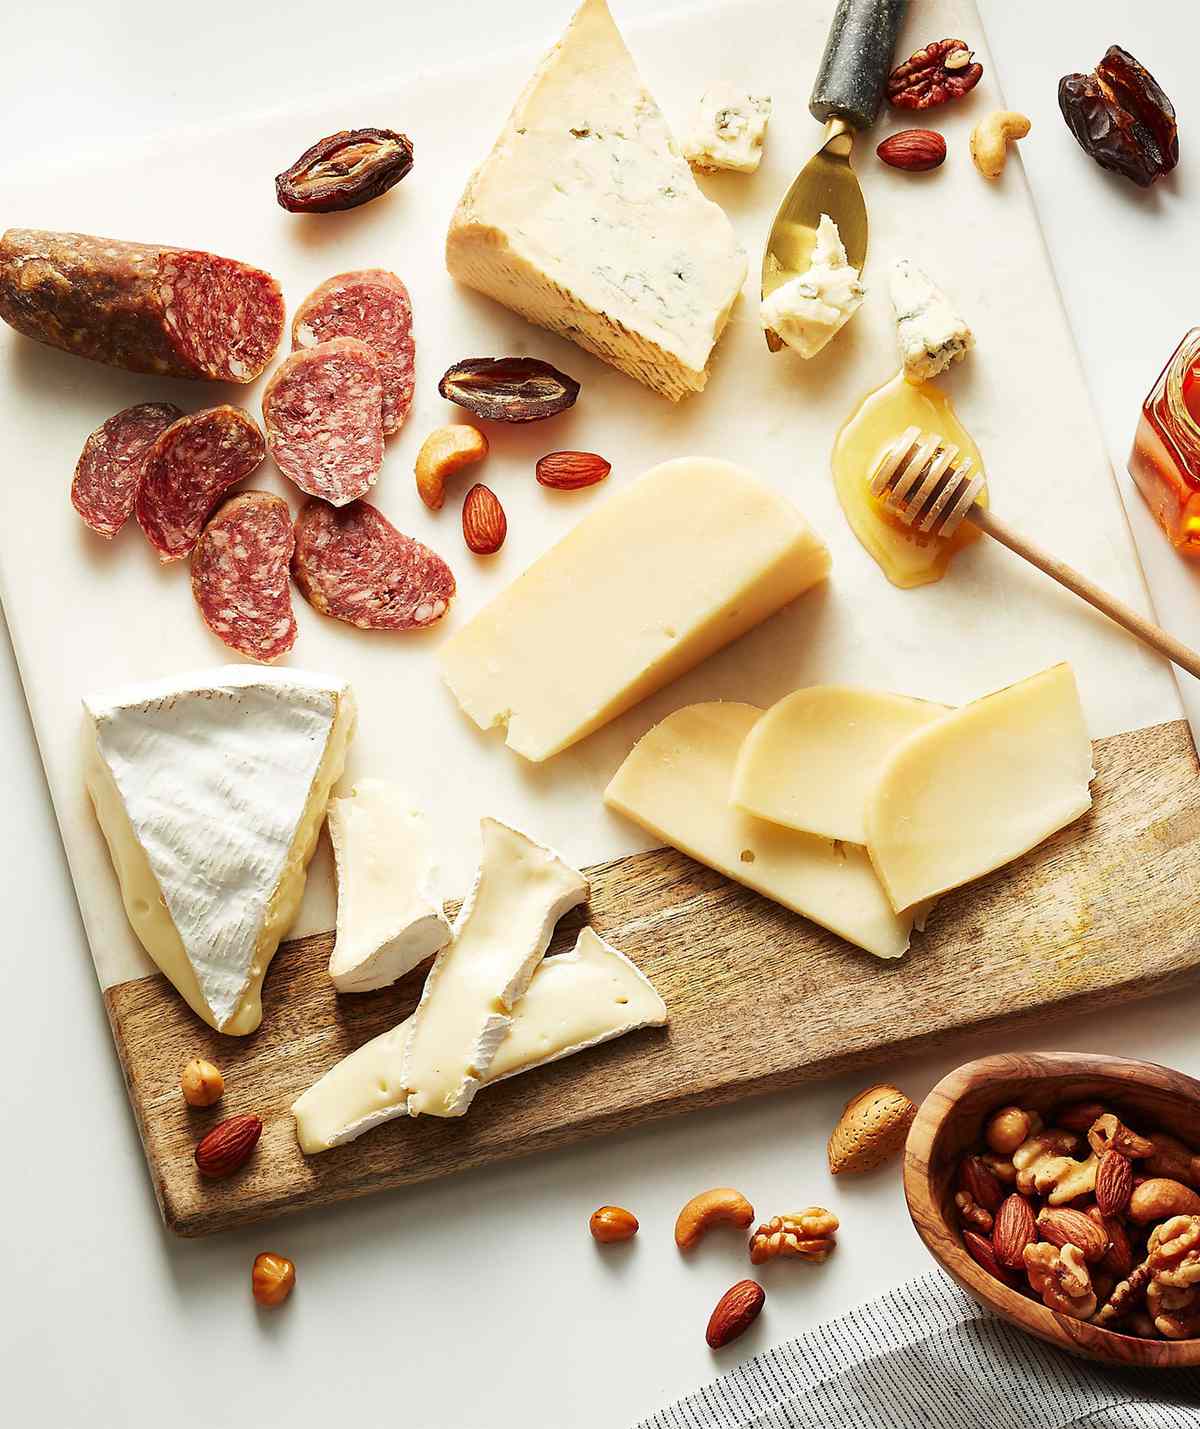 Crate & Barrel Sells Cheese Now, and Building Your Own Charcuterie Board Has Never Been Easier